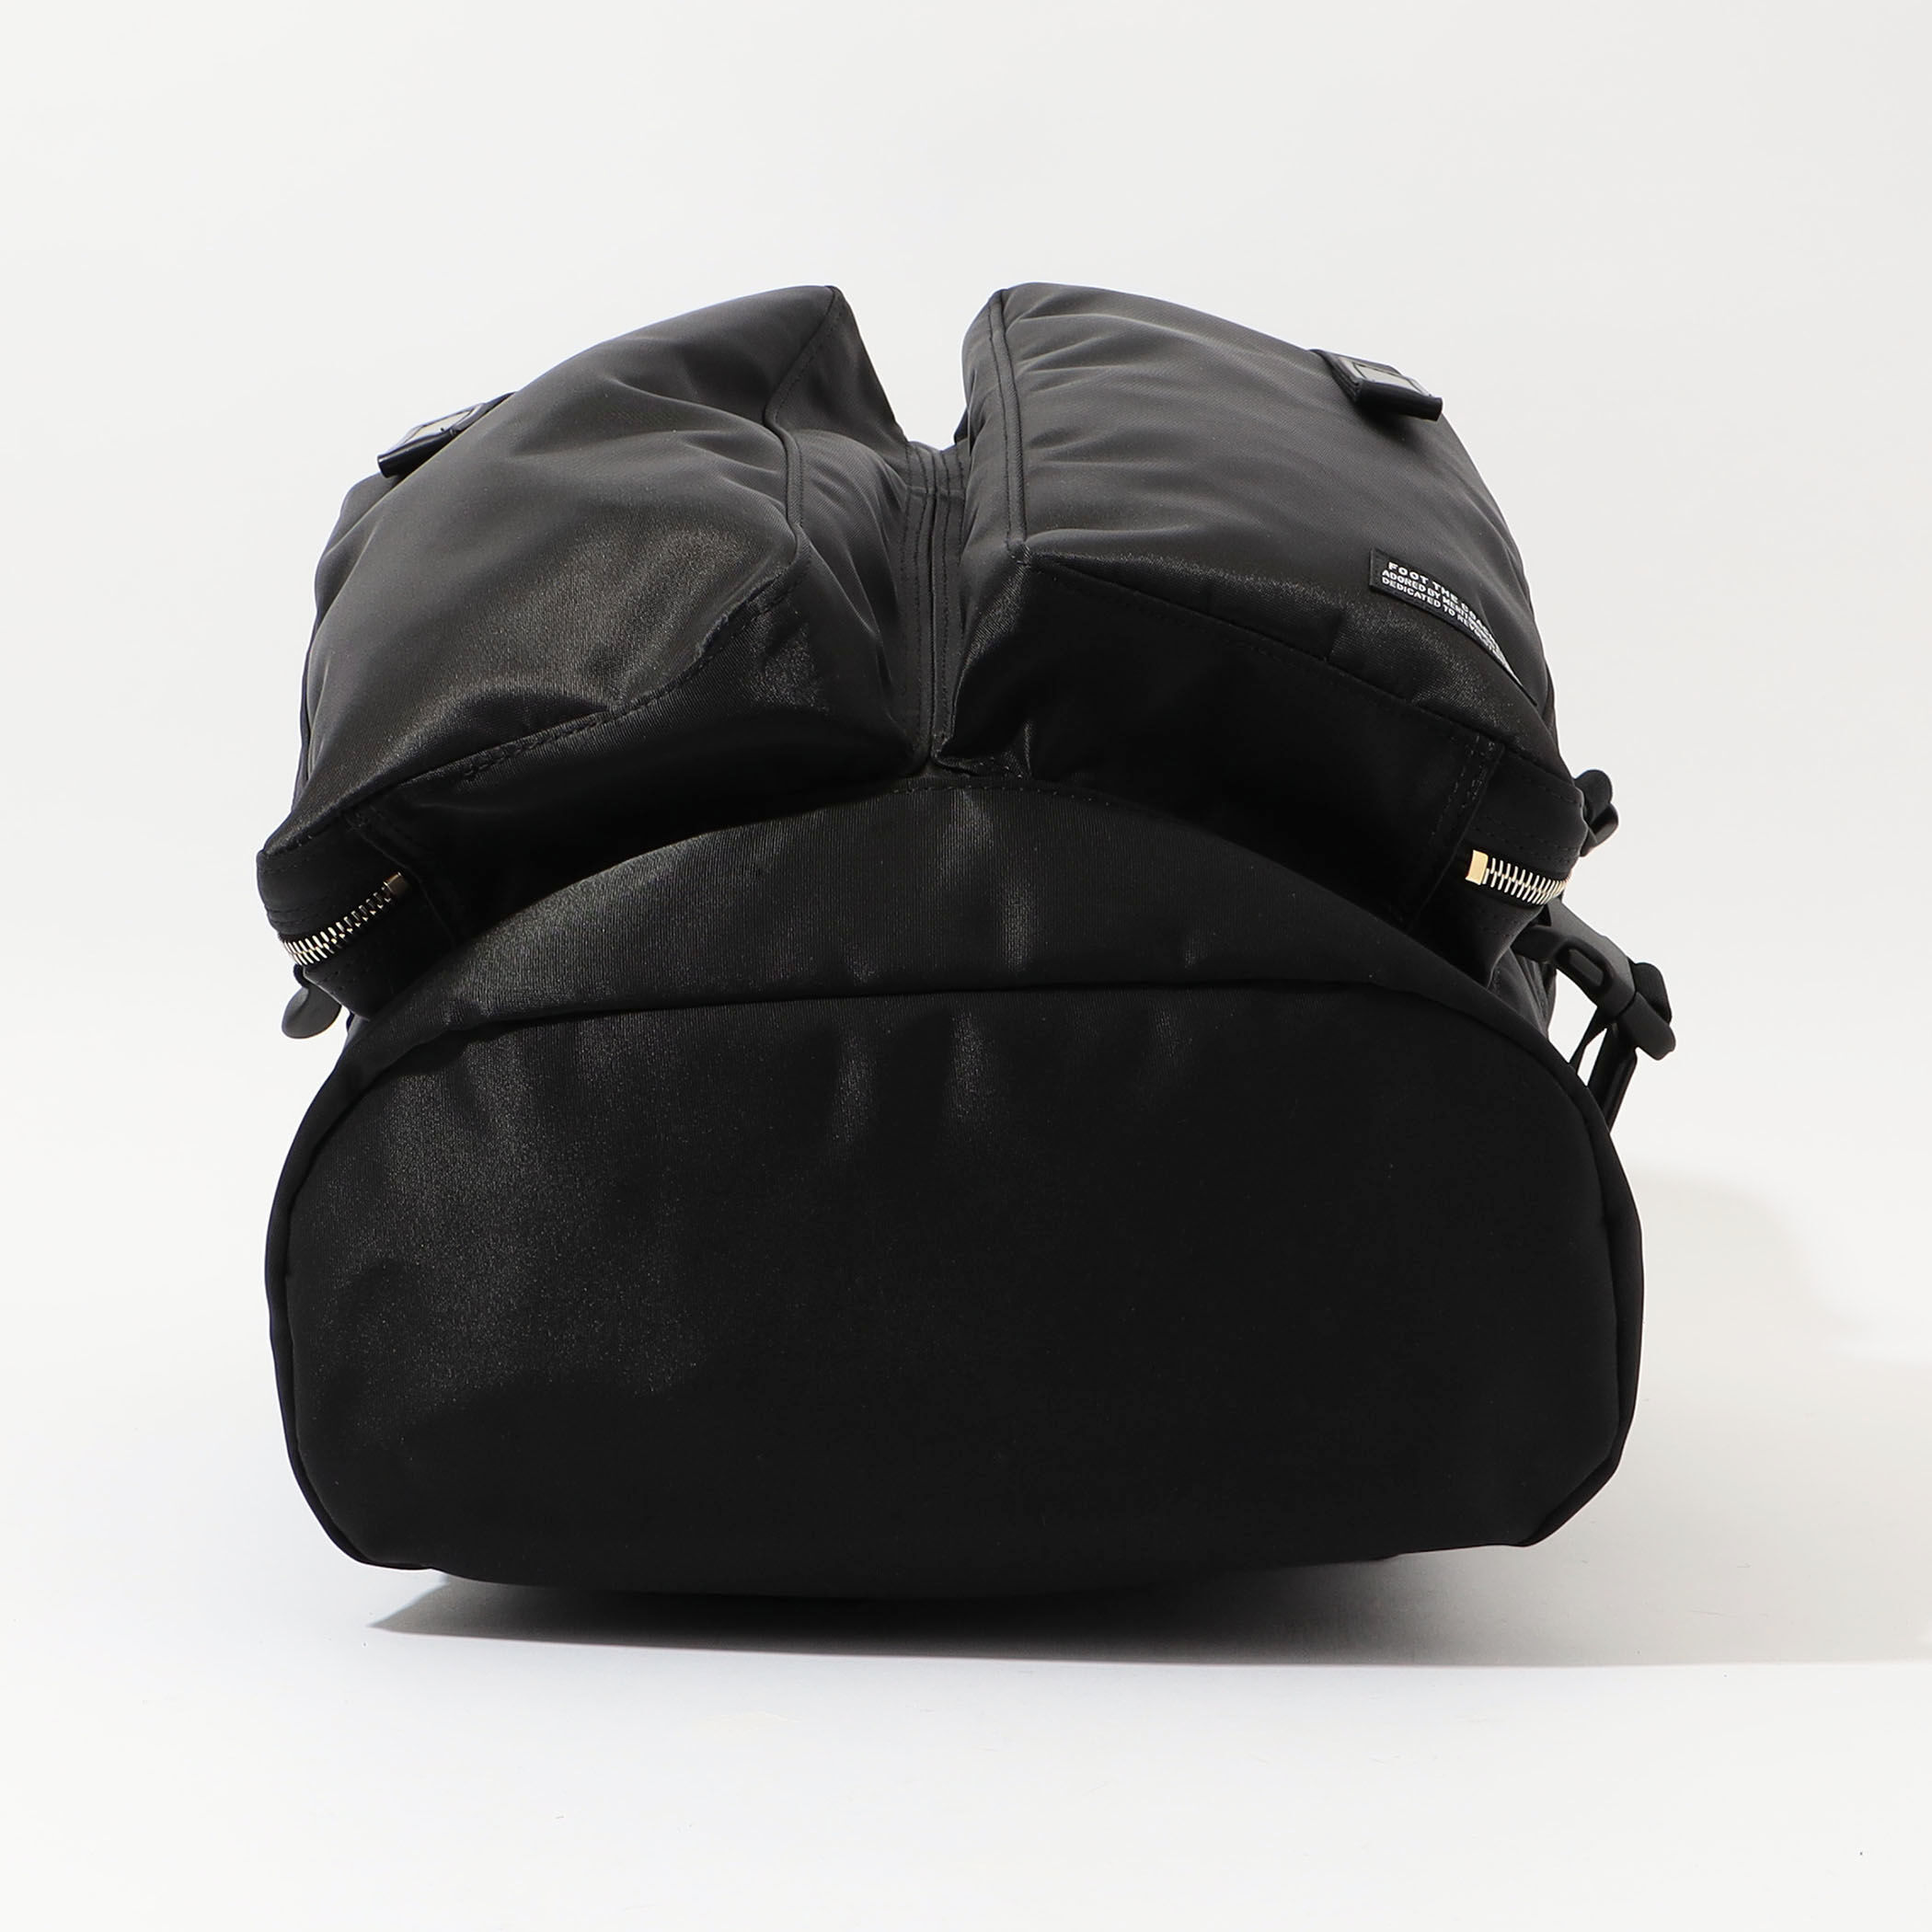 foot the coacher×PORTER MINIMAL BACK PACK ナイロン バックパック